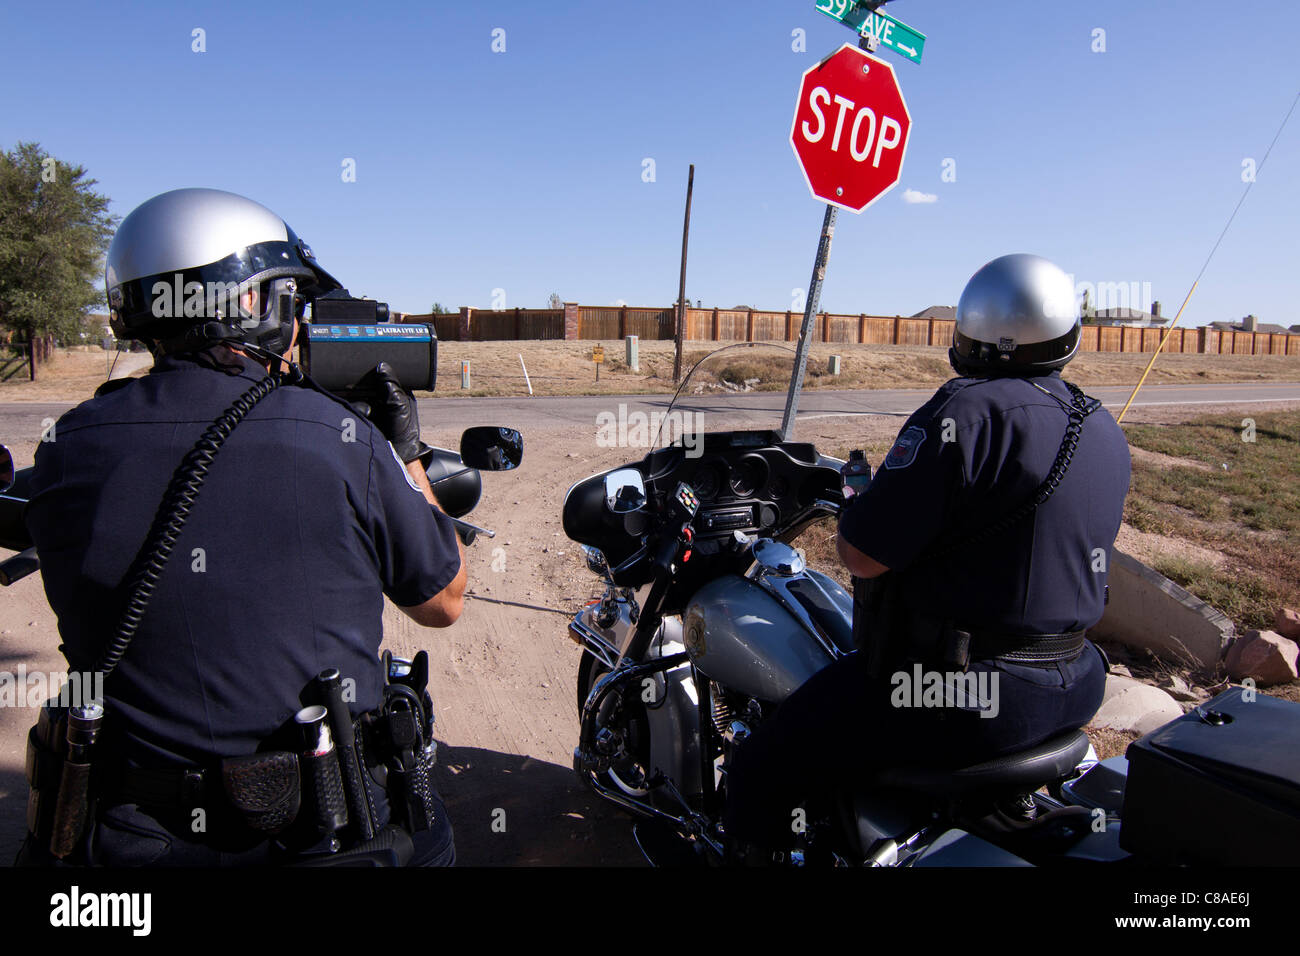 Police officers use radar to check the speed of motorists in Greely, Colorado, USA, 10/3/11. Stock Photo